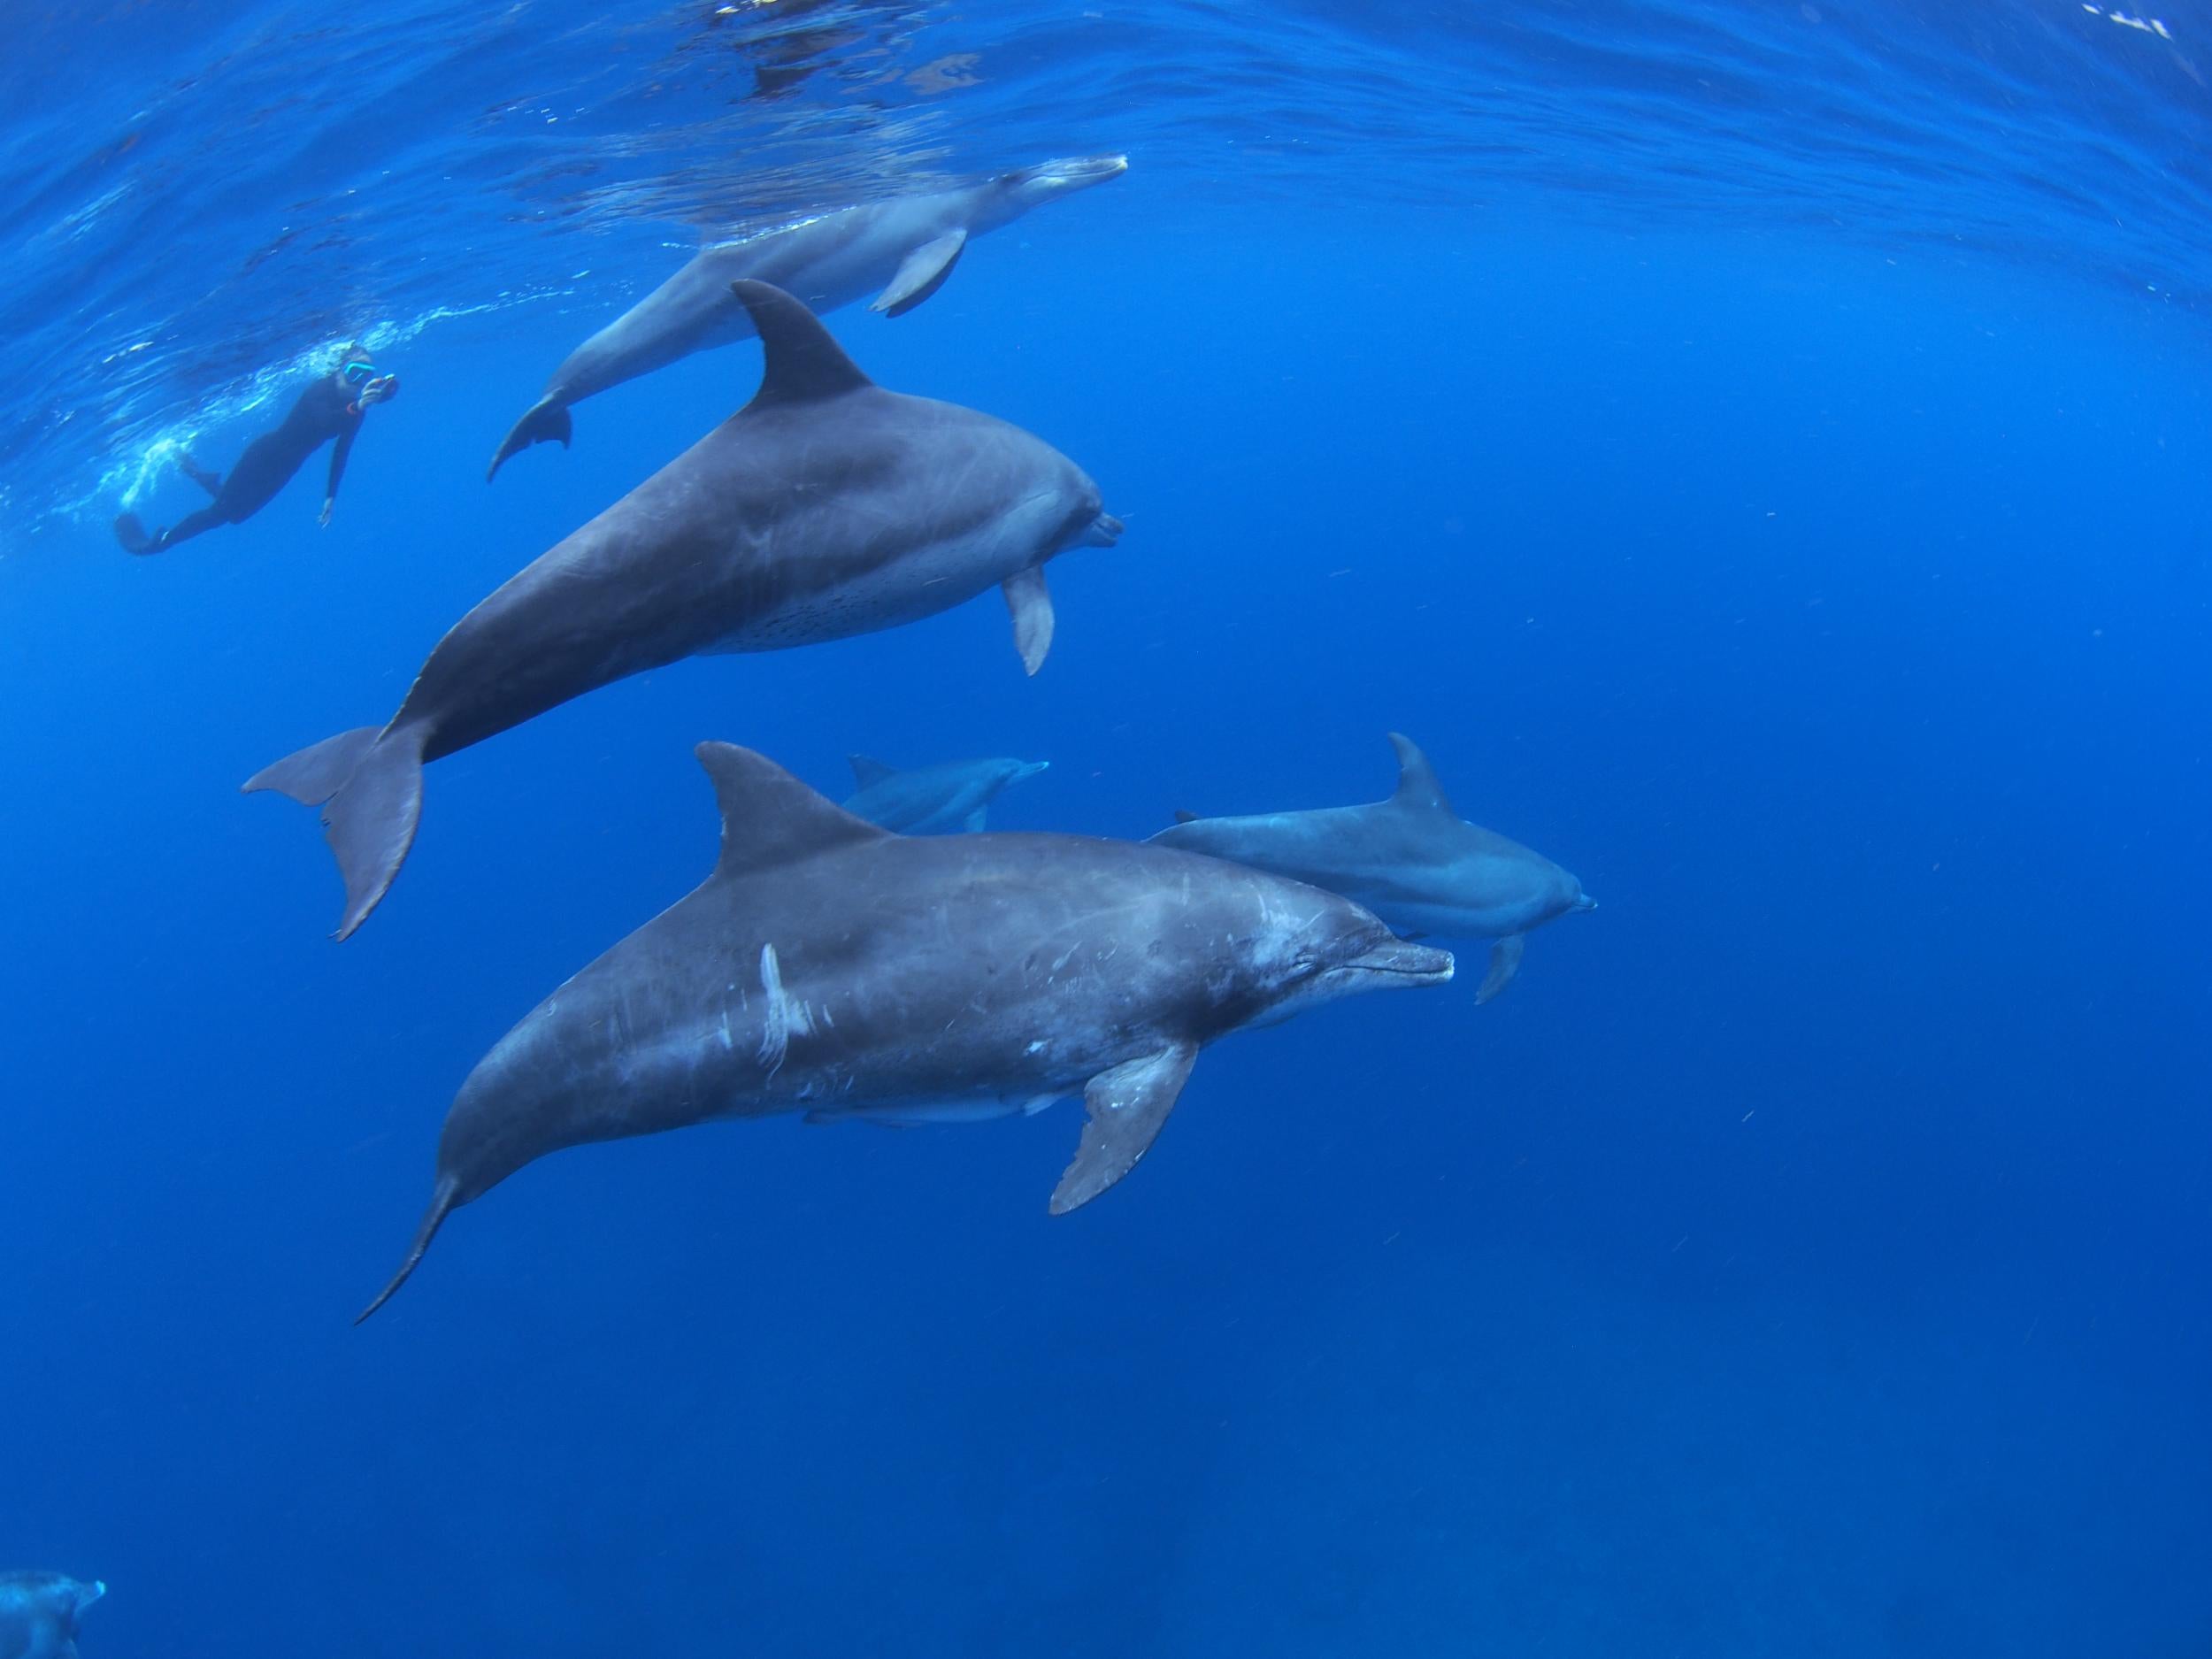 Swimming with bottlenose dolphins